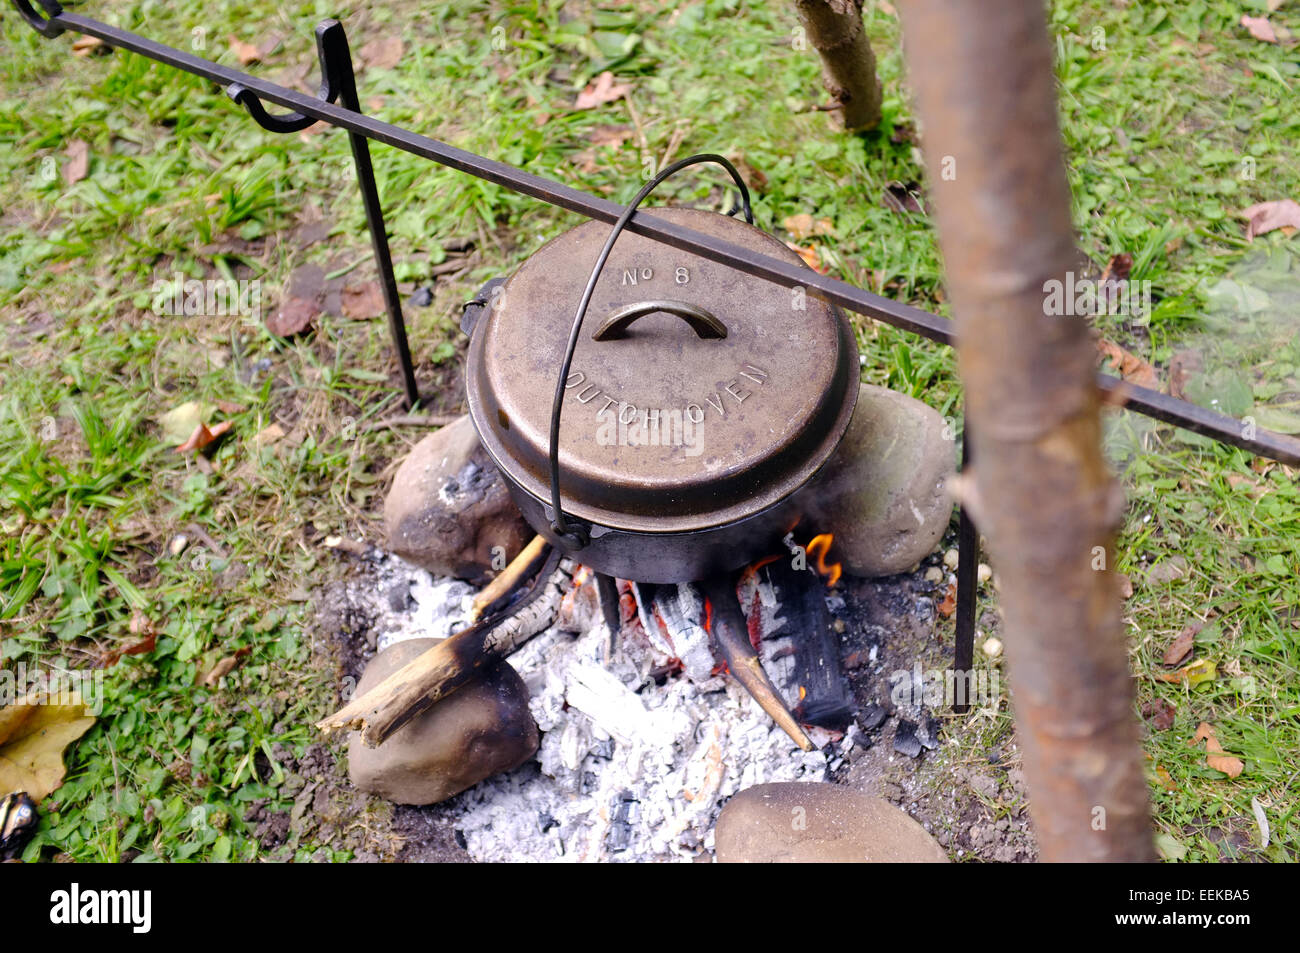 https://c8.alamy.com/comp/EEKBA5/a-dutch-oven-cooking-over-an-open-fire-at-the-museum-of-ontario-archaeology-EEKBA5.jpg